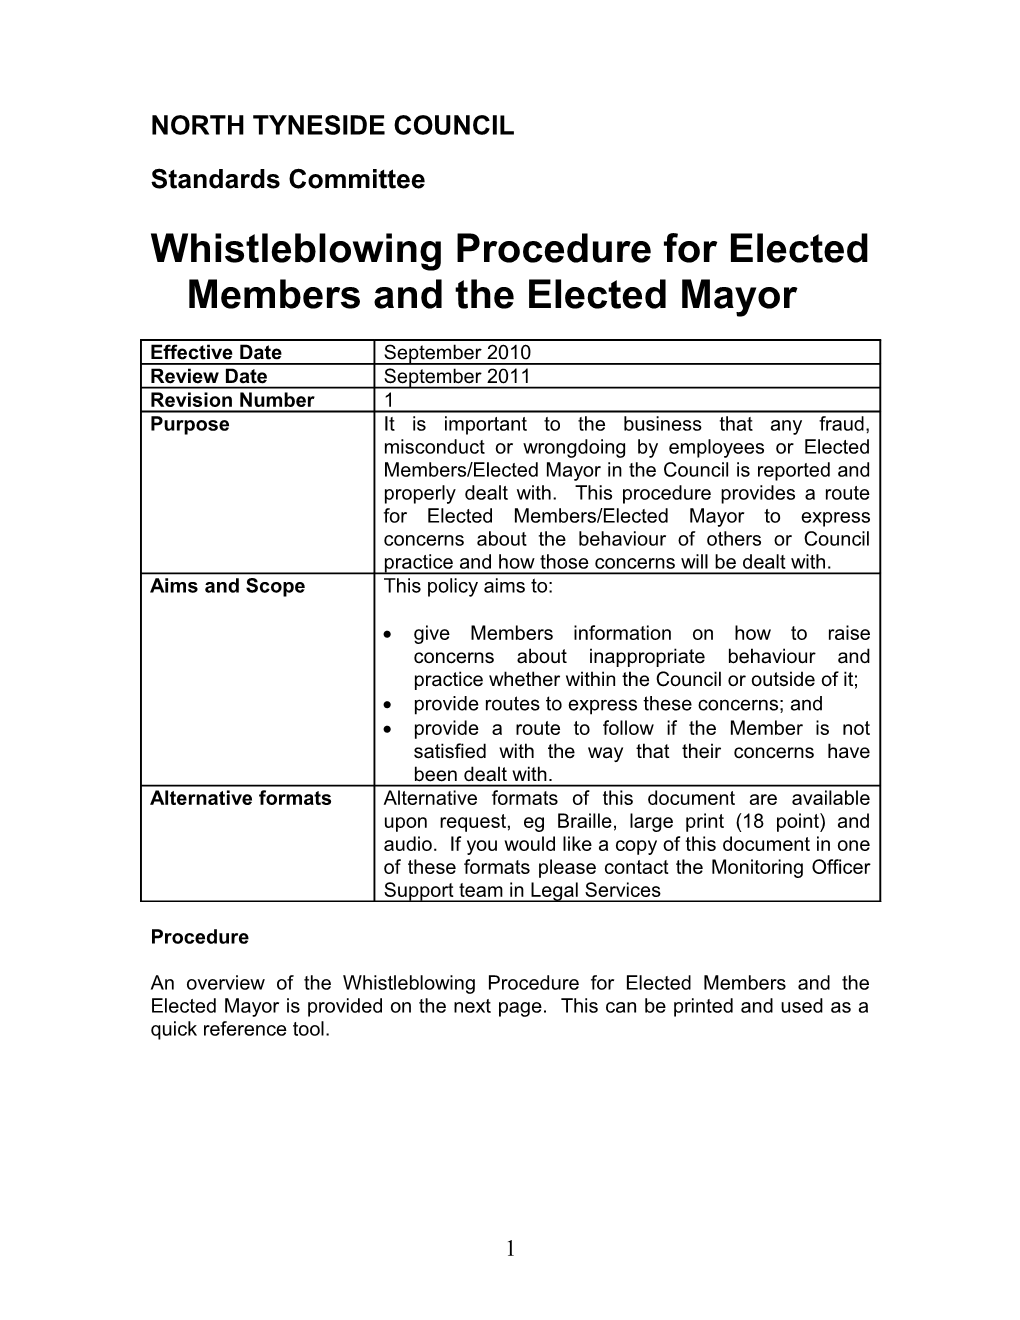 Whistleblowing Procedure for Elected Members and the Elected Mayor